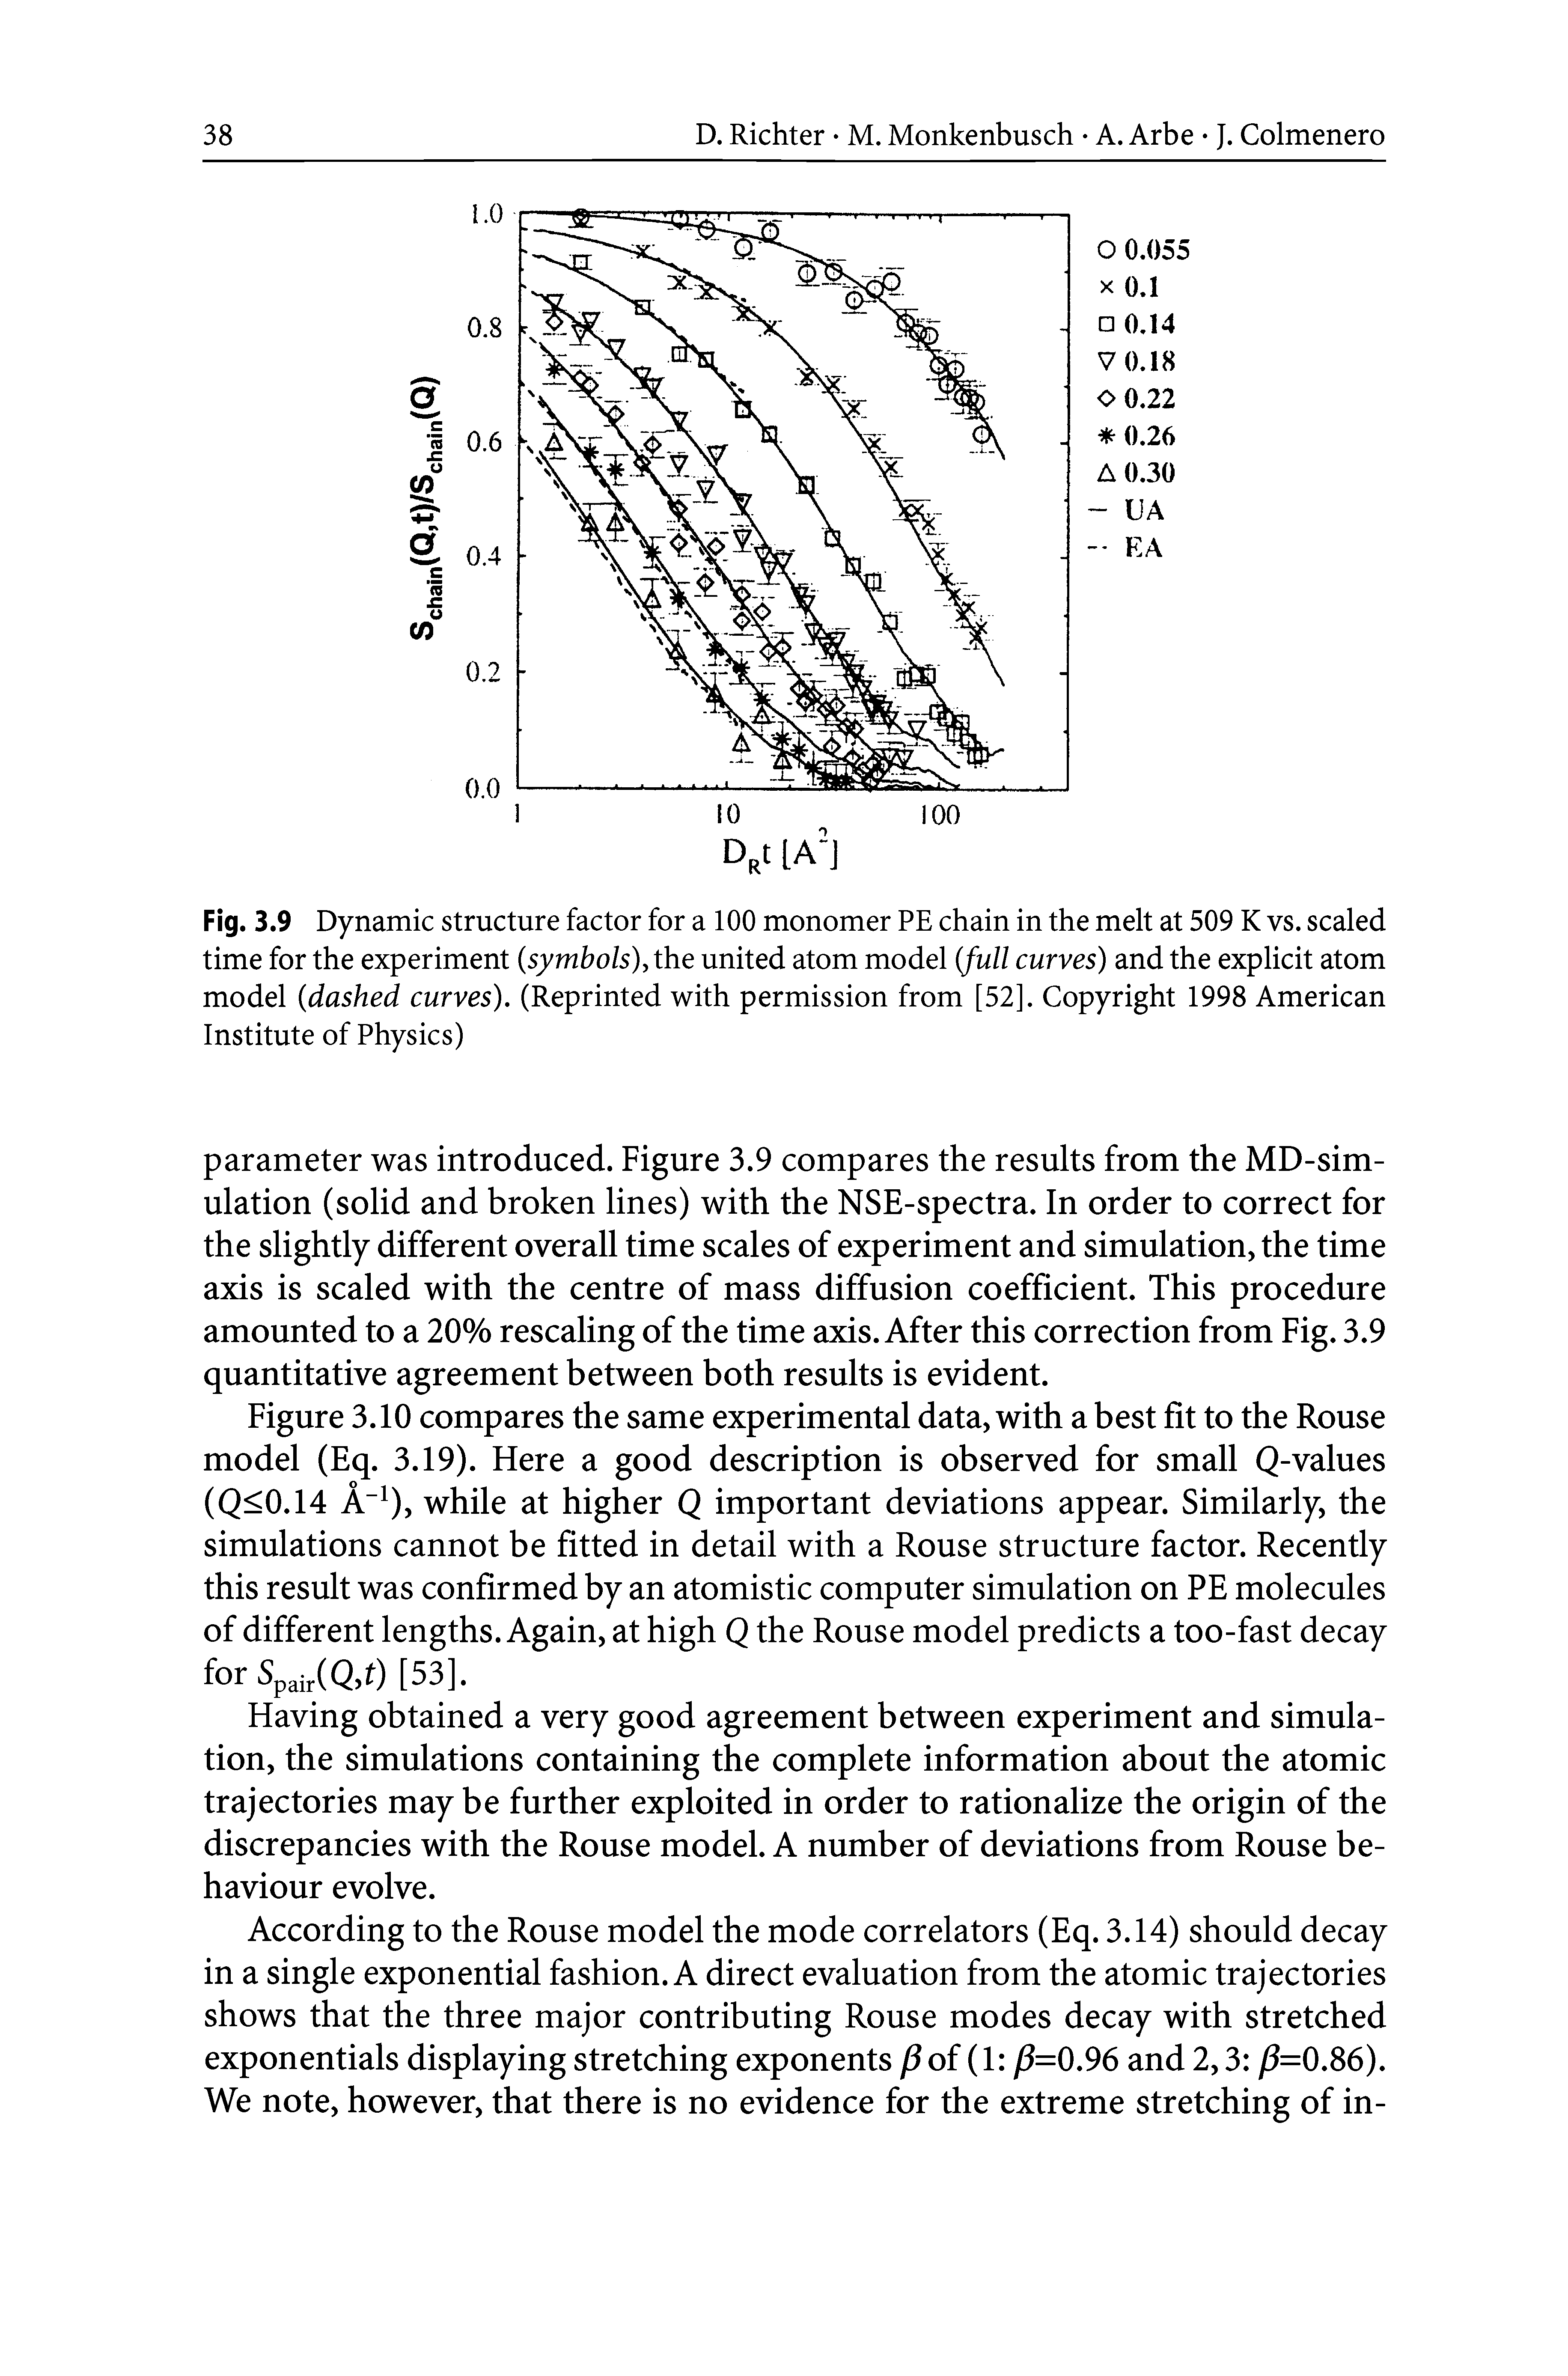 Fig. 3.9 Dynamic structure factor for a 100 monomer PE chain in the melt at 509 K vs. scaled time for the experiment (symbols), the united atom model (full curves) and the explicit atom model (dashed curves). (Reprinted with permission from [52]. Copyright 1998 American Institute of Physics)...